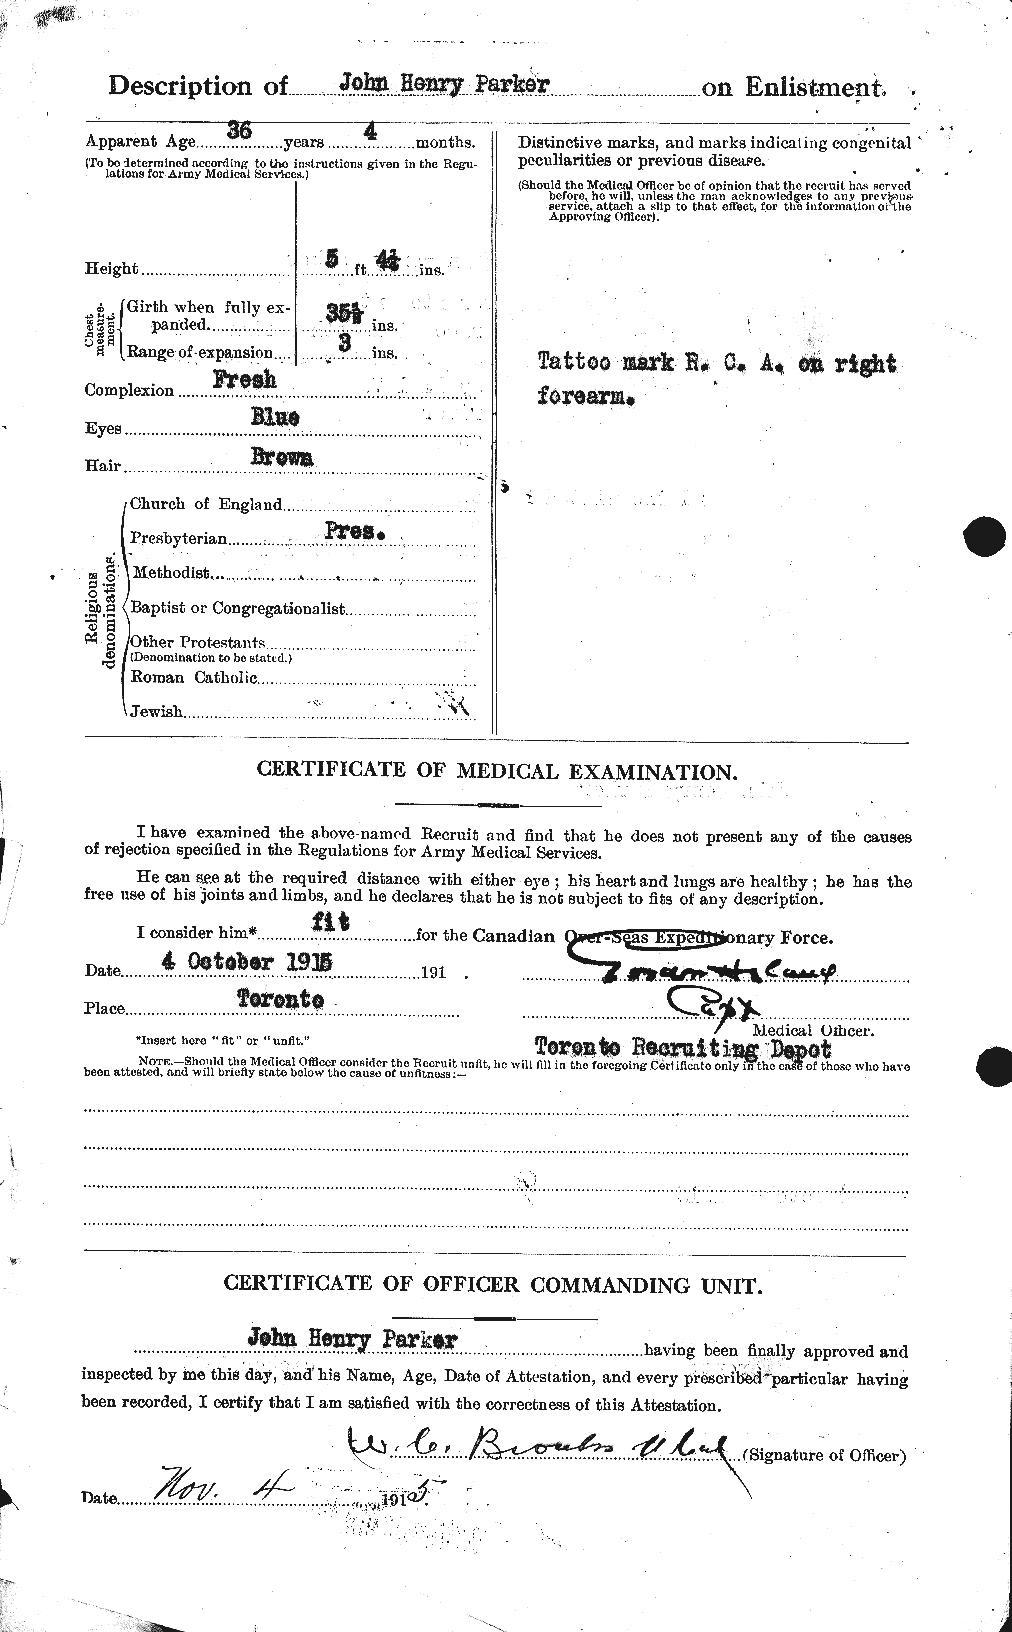 Personnel Records of the First World War - CEF 565475b